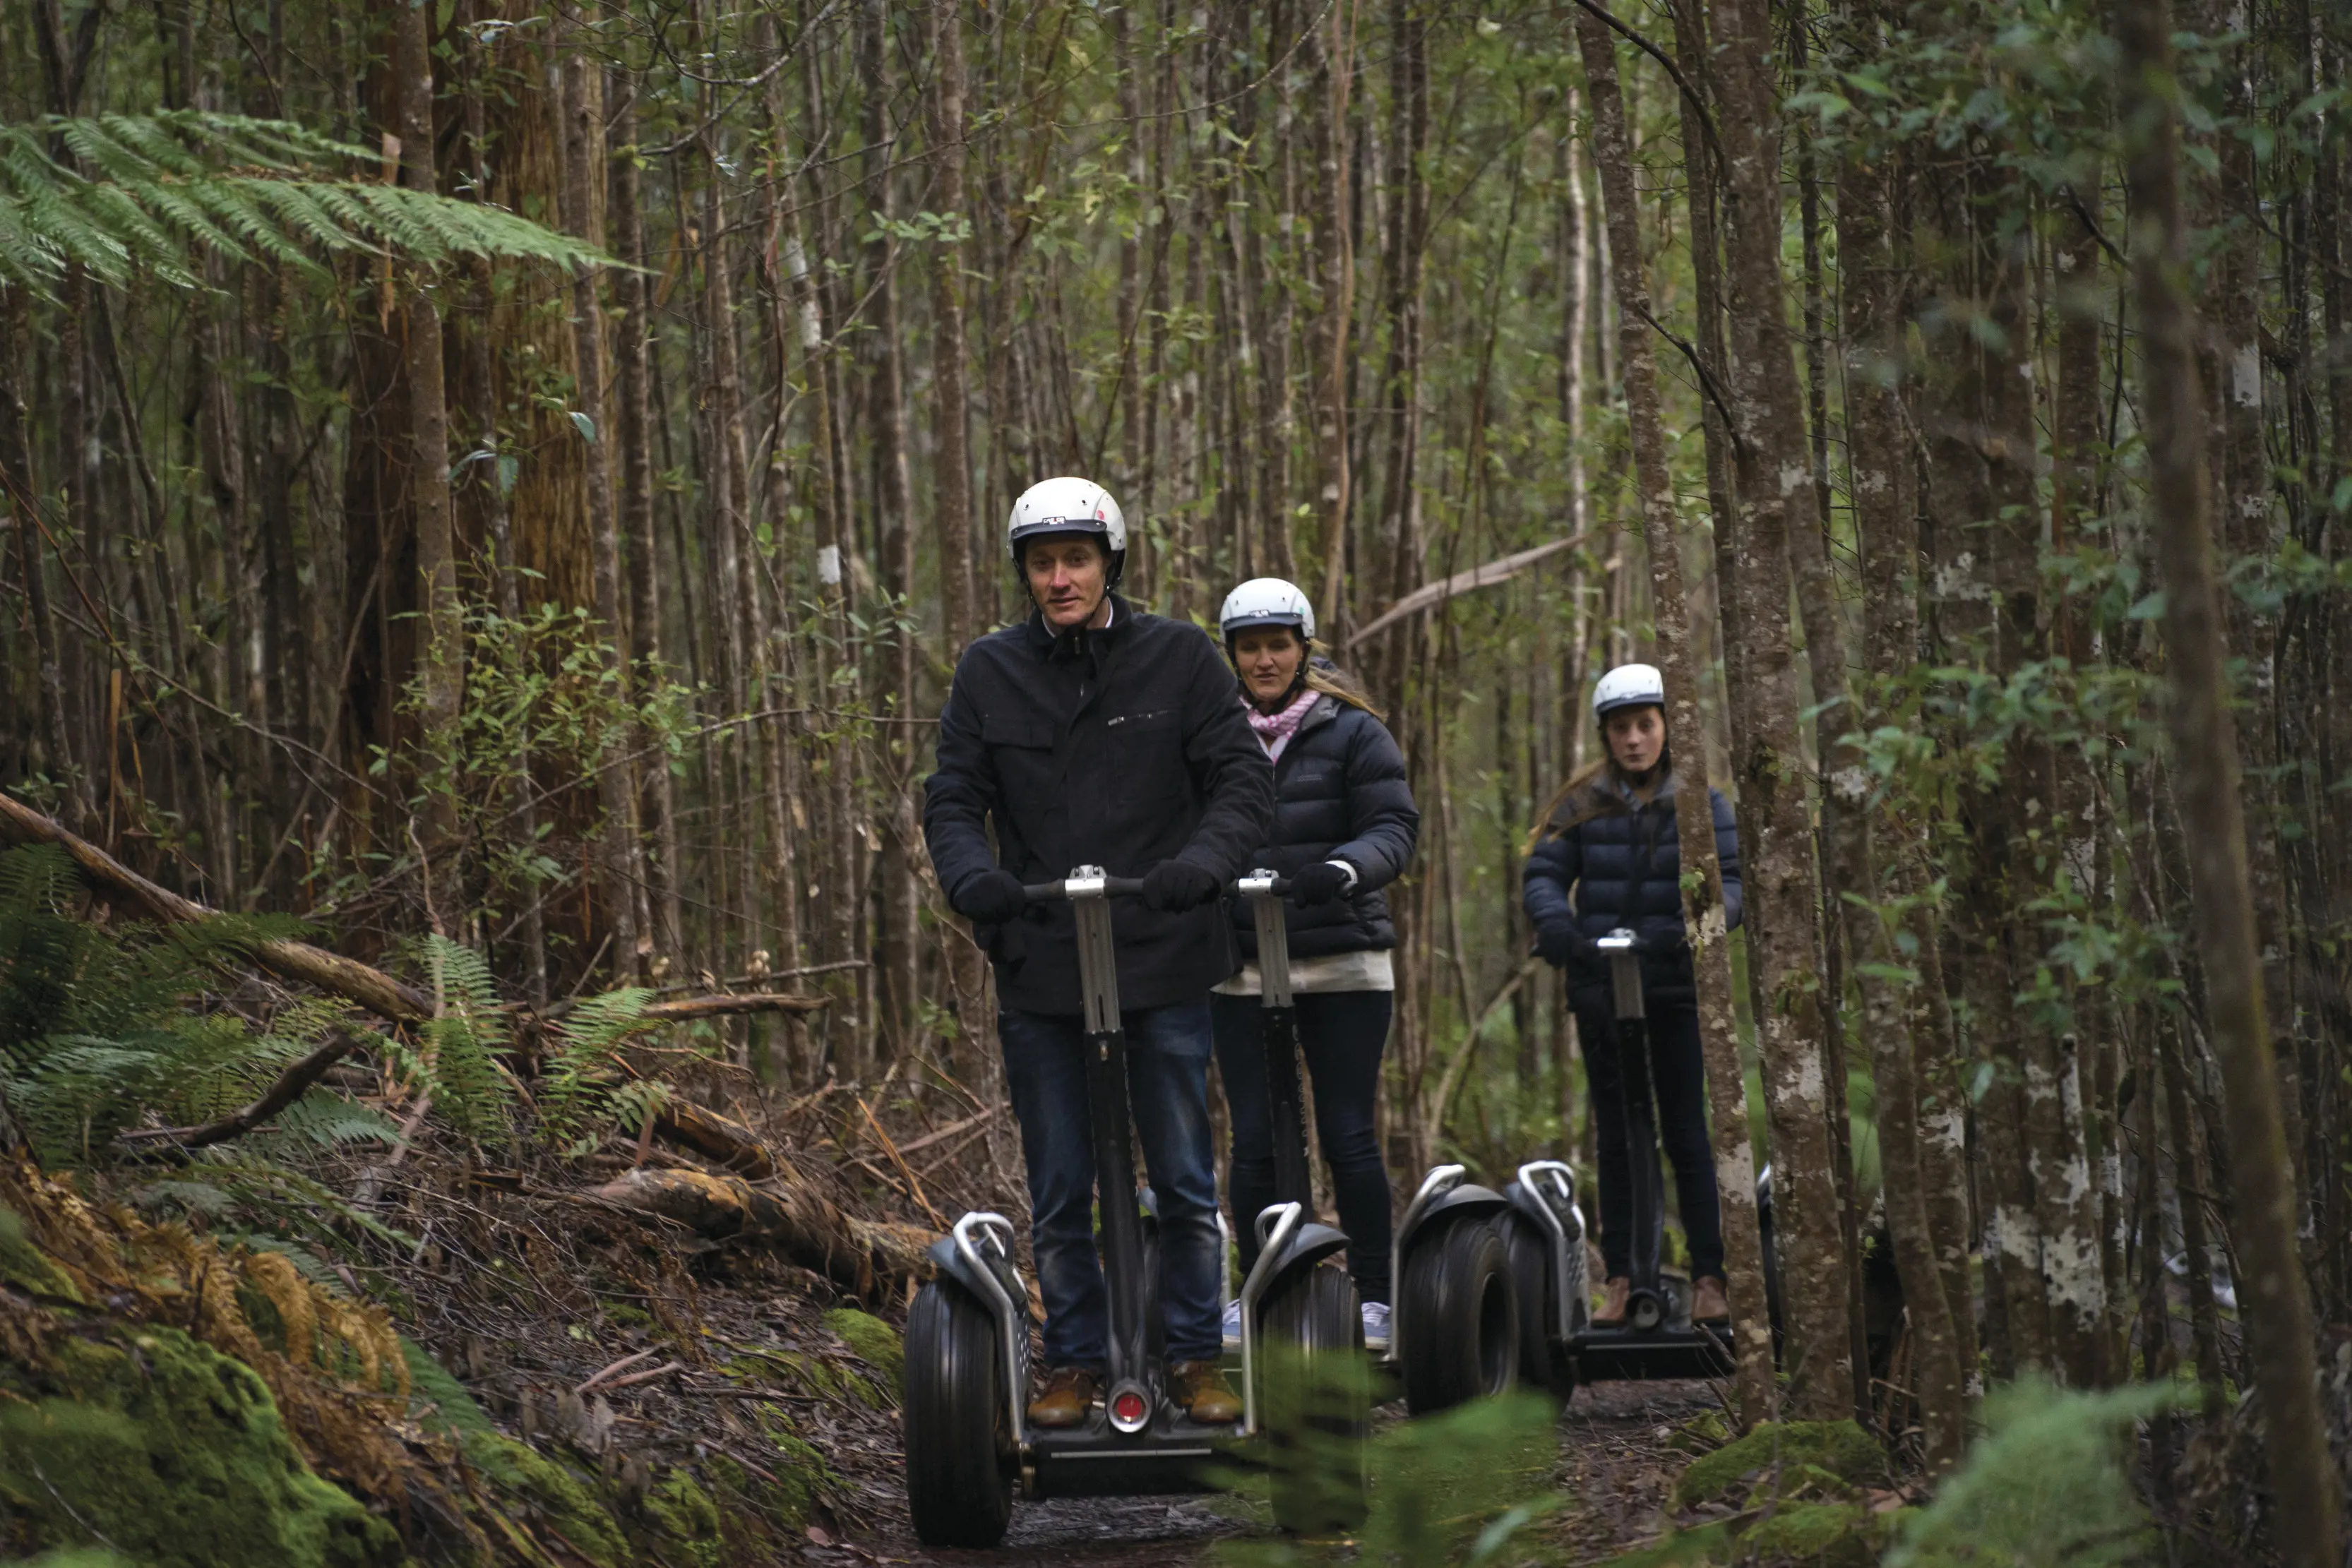 Three people wearing white helmets ride segways on a pathway surrounded by tall trees at Hollybank Wilderness Adventures.